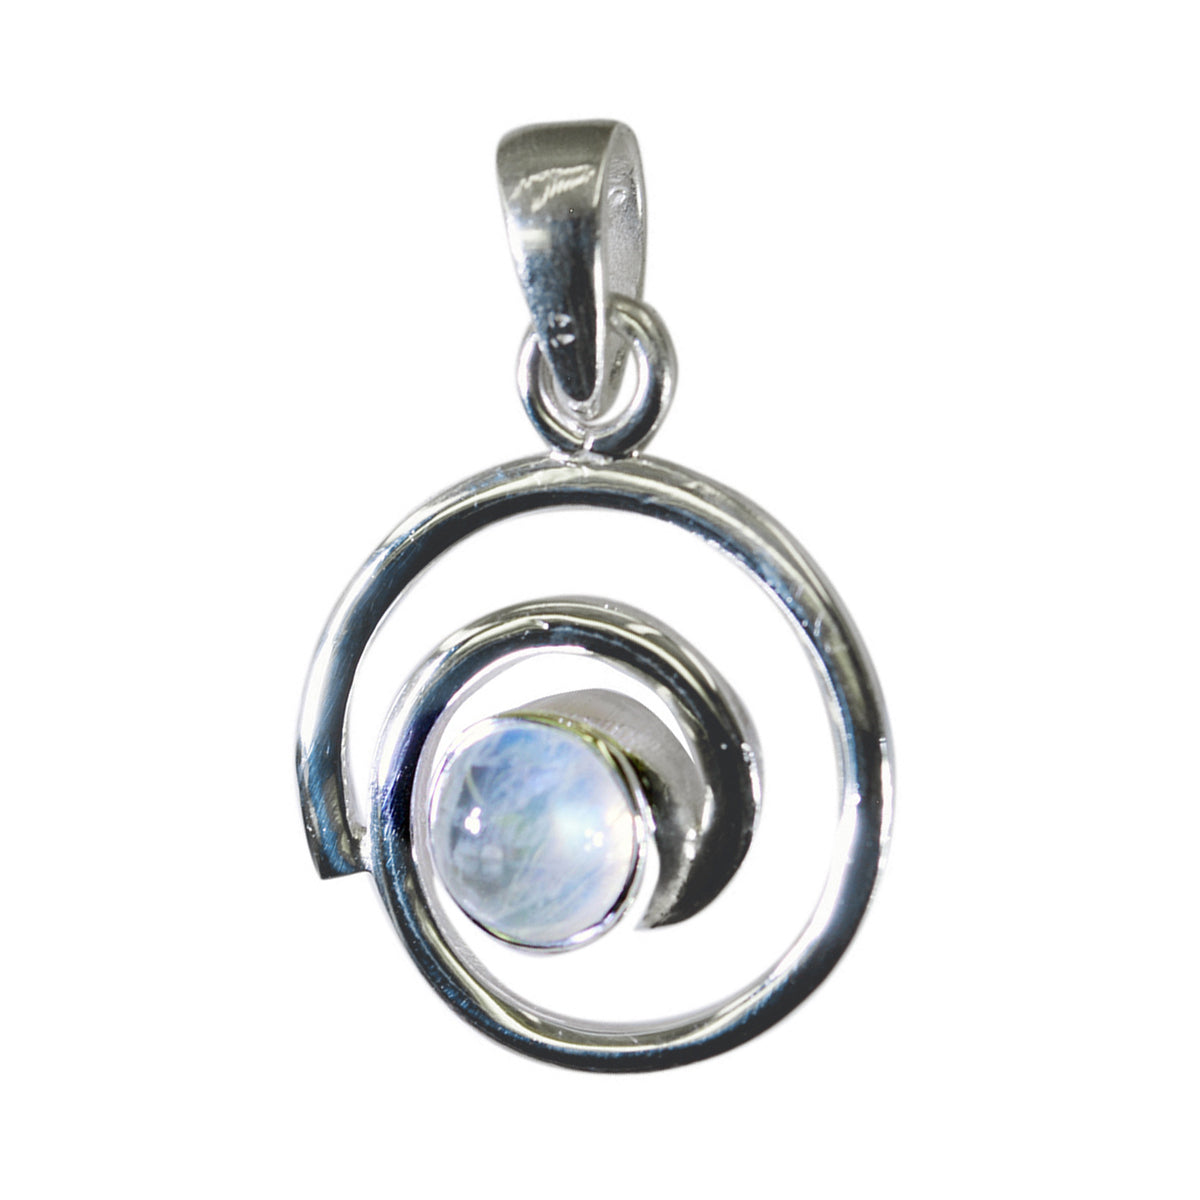 Riyo Exquisite Gems Round Cabochon White Rainbow Moonstone Solid Silver Pendant Gift For Easter Sunday